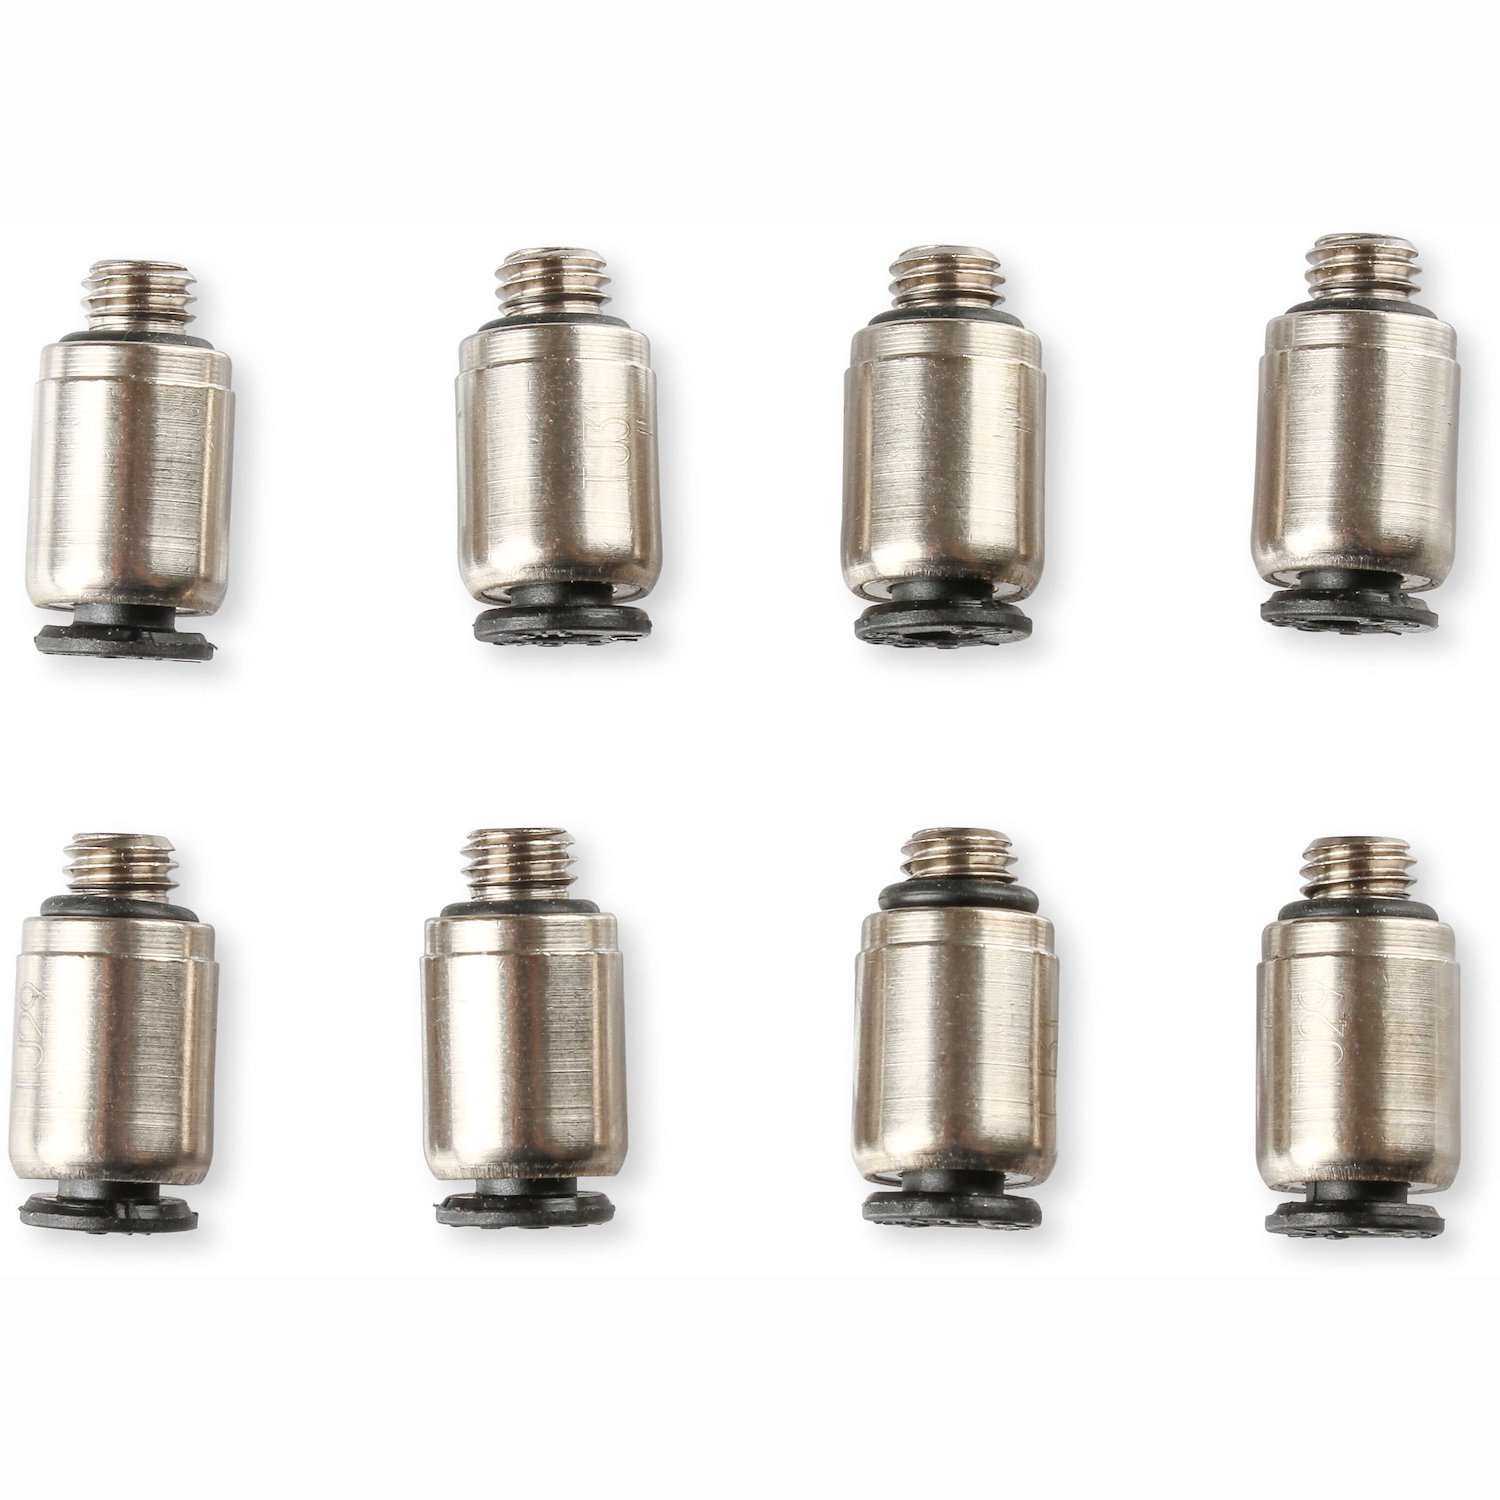 Push Lock Compression Fittings [10-32 Male to 1/8